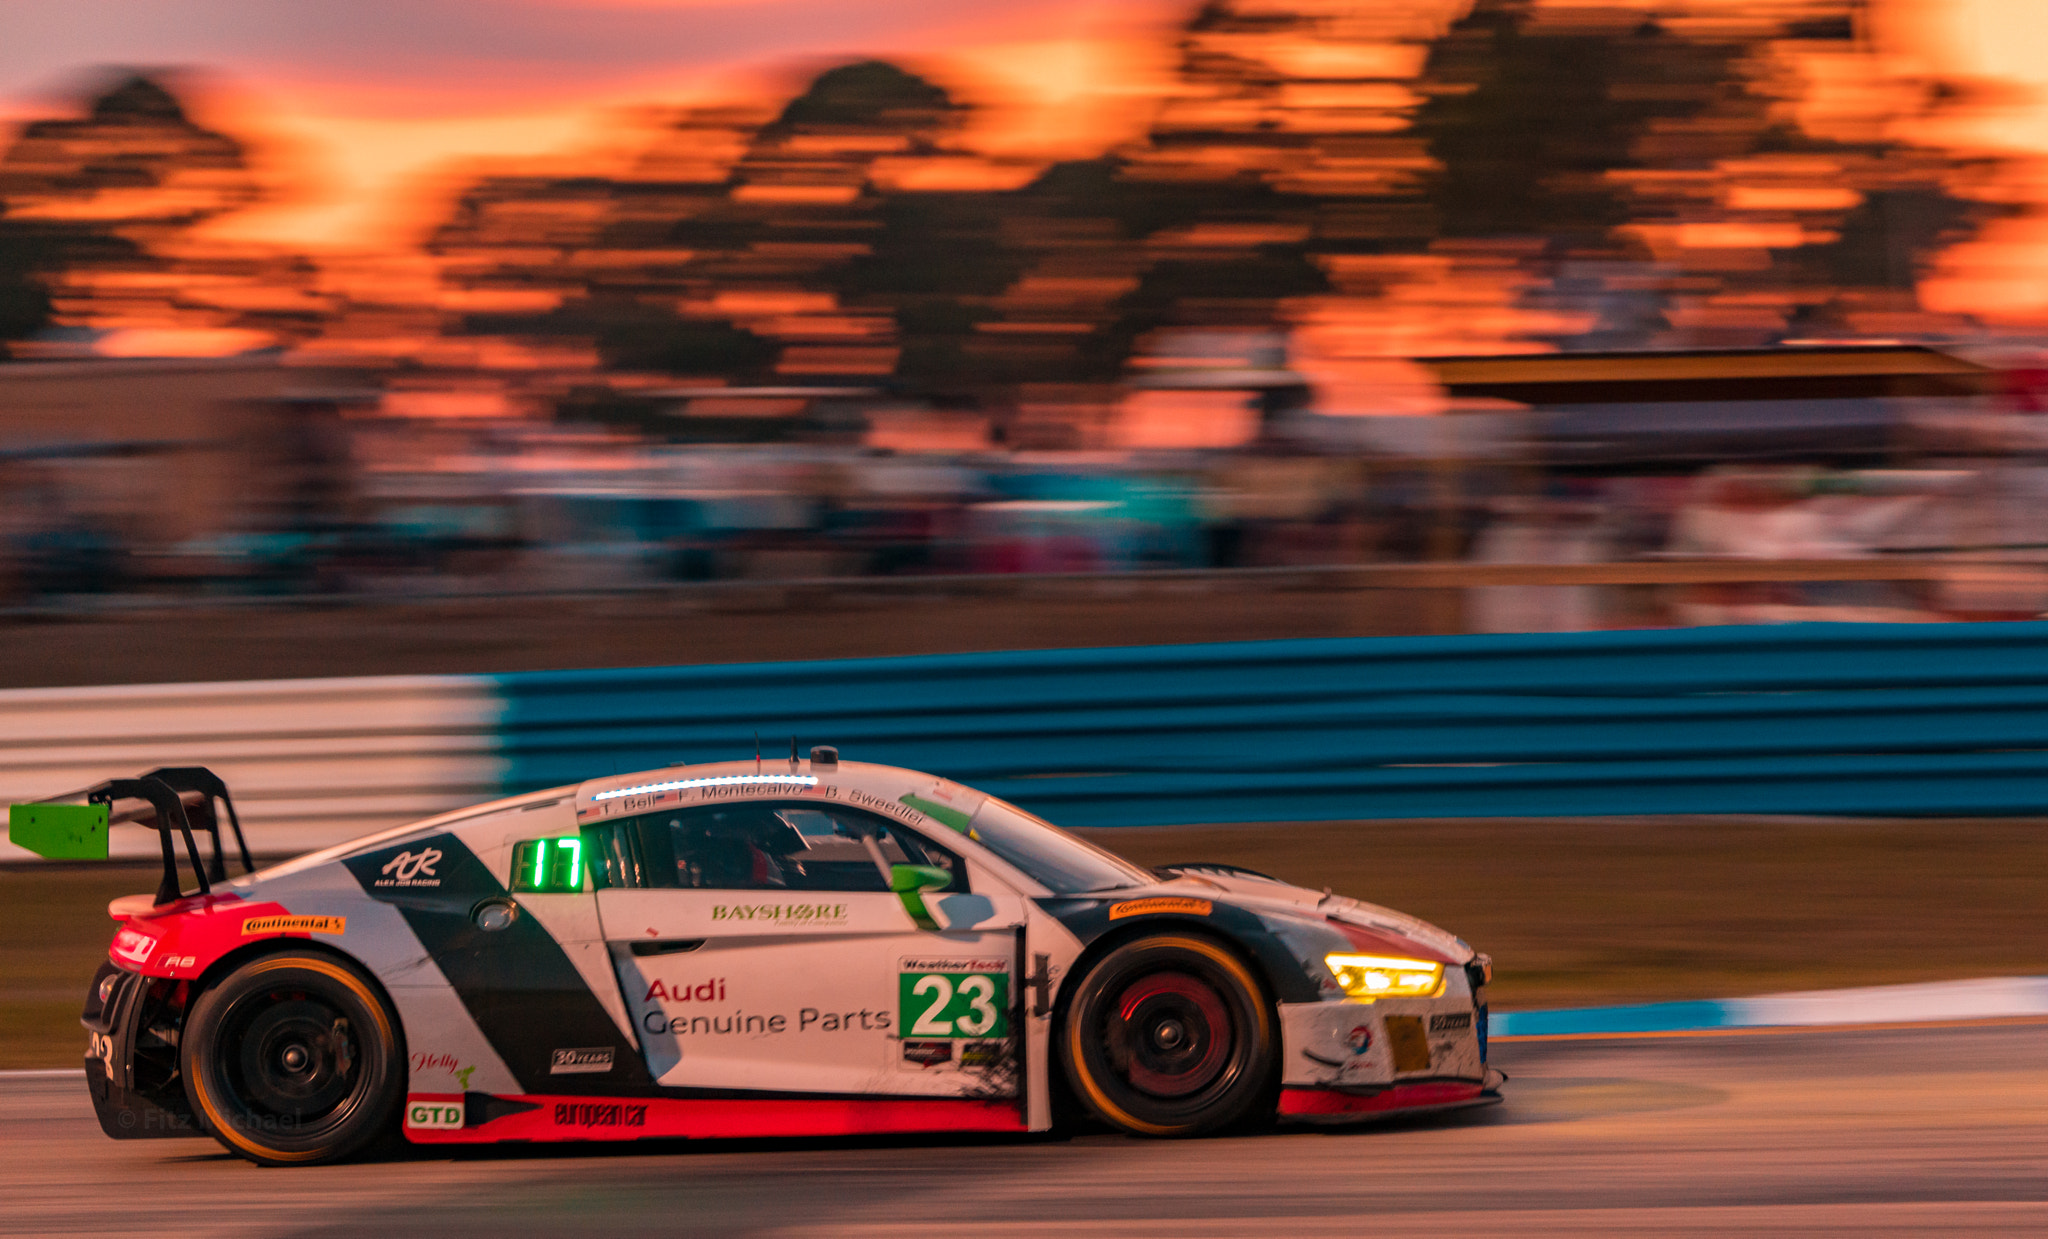 Sony a7R II sample photo. 2017 12hr of sebring photography